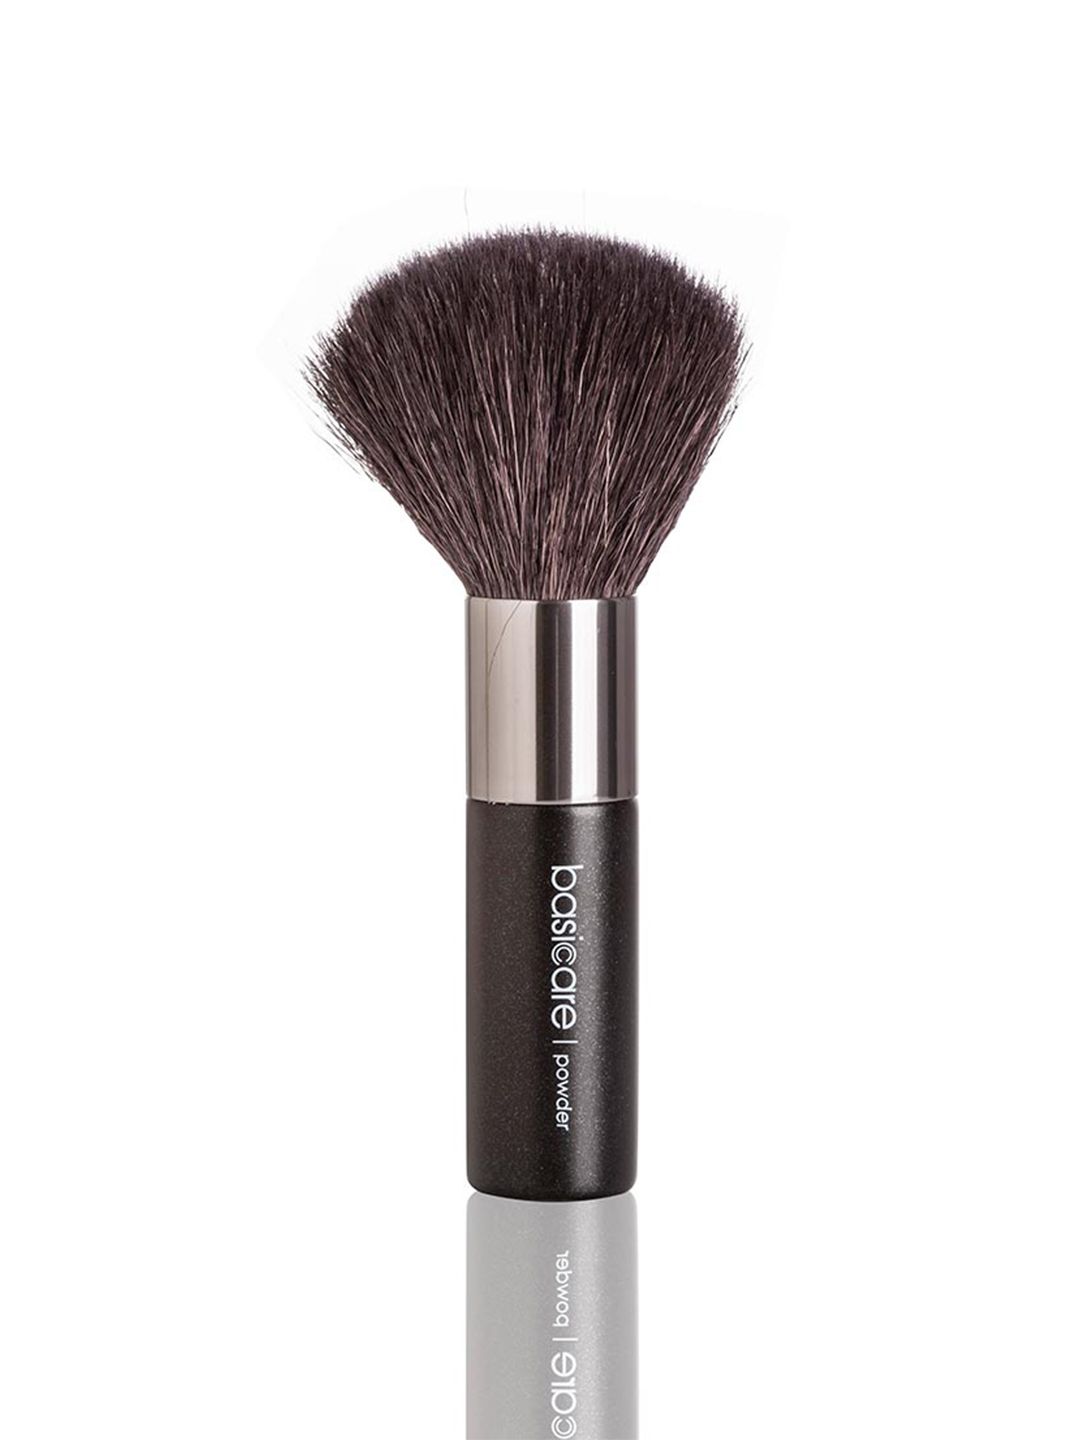 basicare Compact Powder Makeup Brushes Price in India